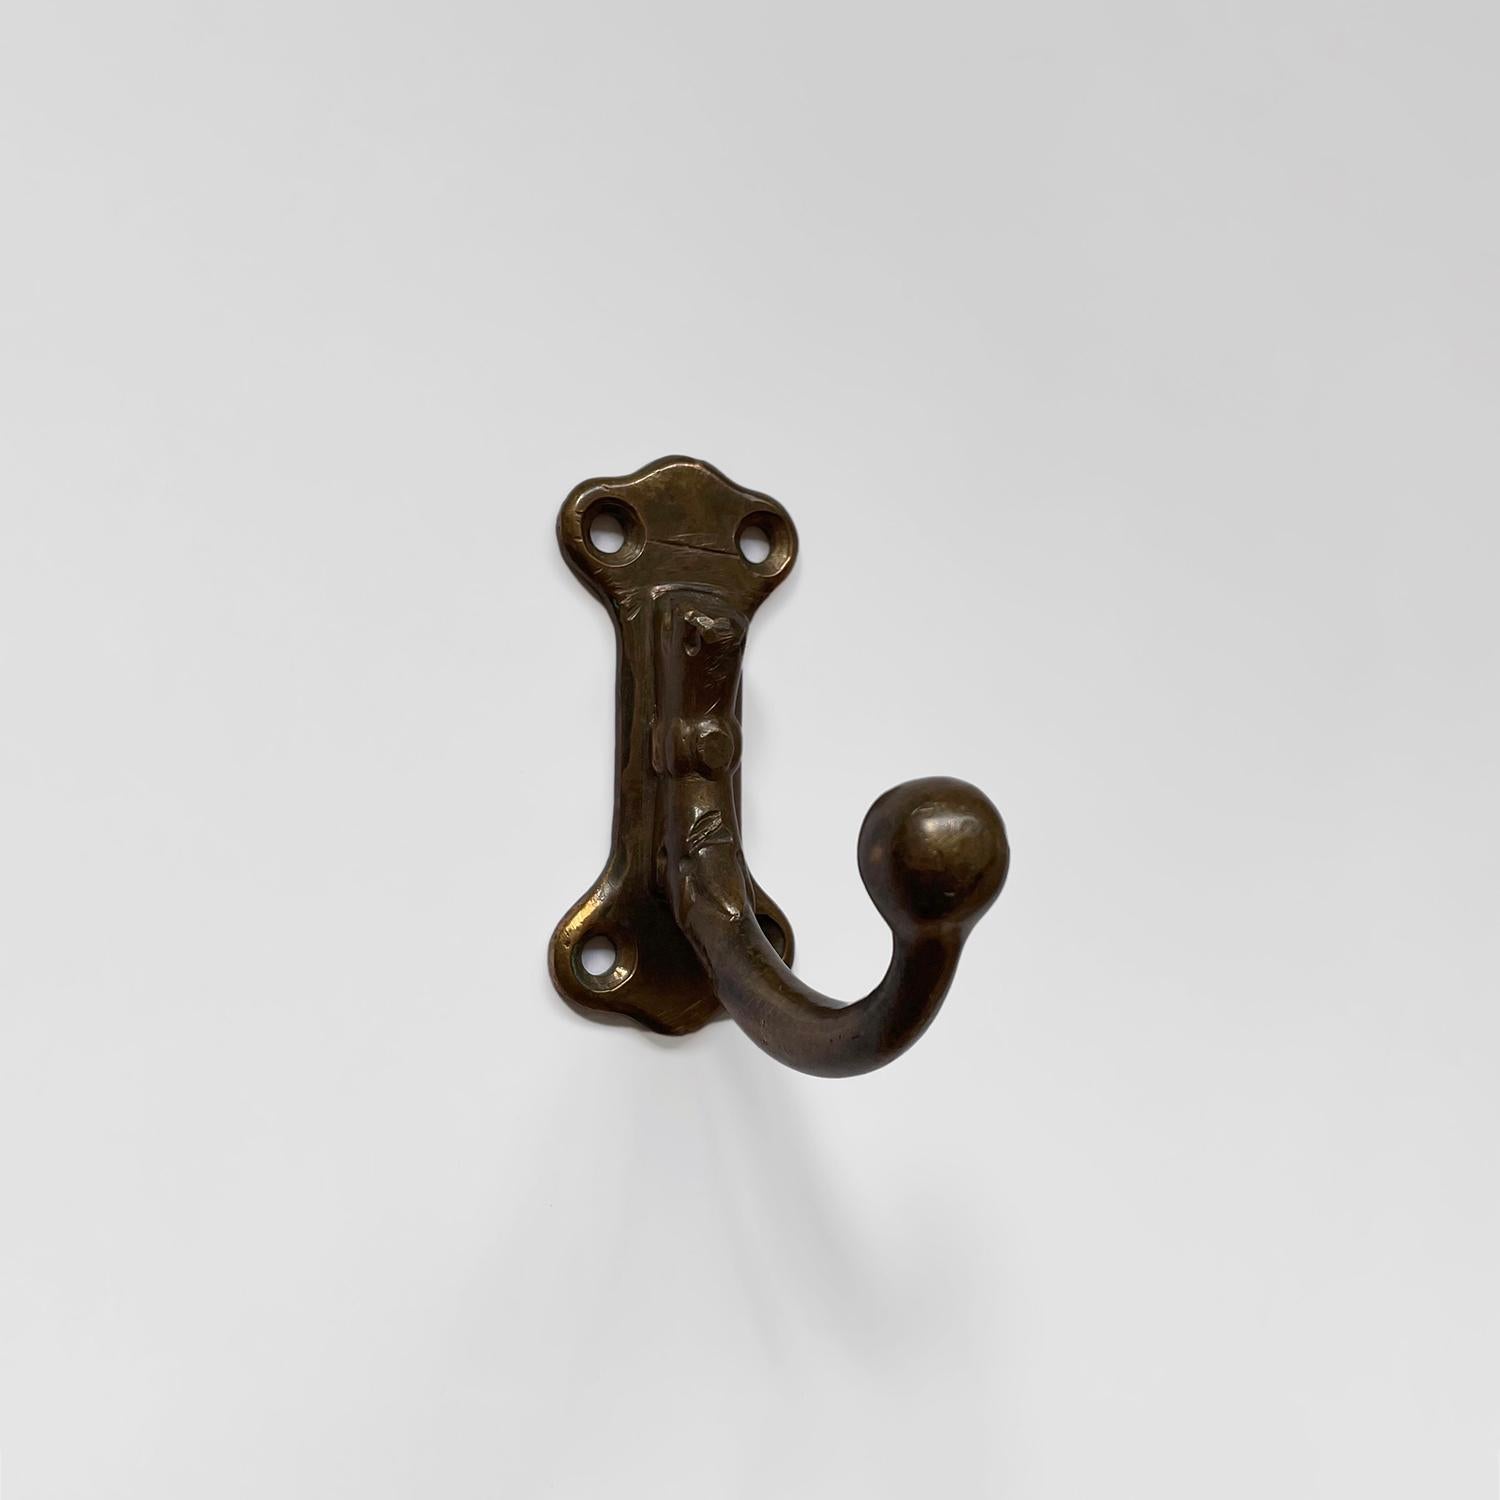 French bronze single wall hook
France, mid century
Petite in its construction yet charming nonetheless
Sculpted bronze J hook finished with an oversized ball knob hook
Wall mounted hook is supported by a single bracket which requires four